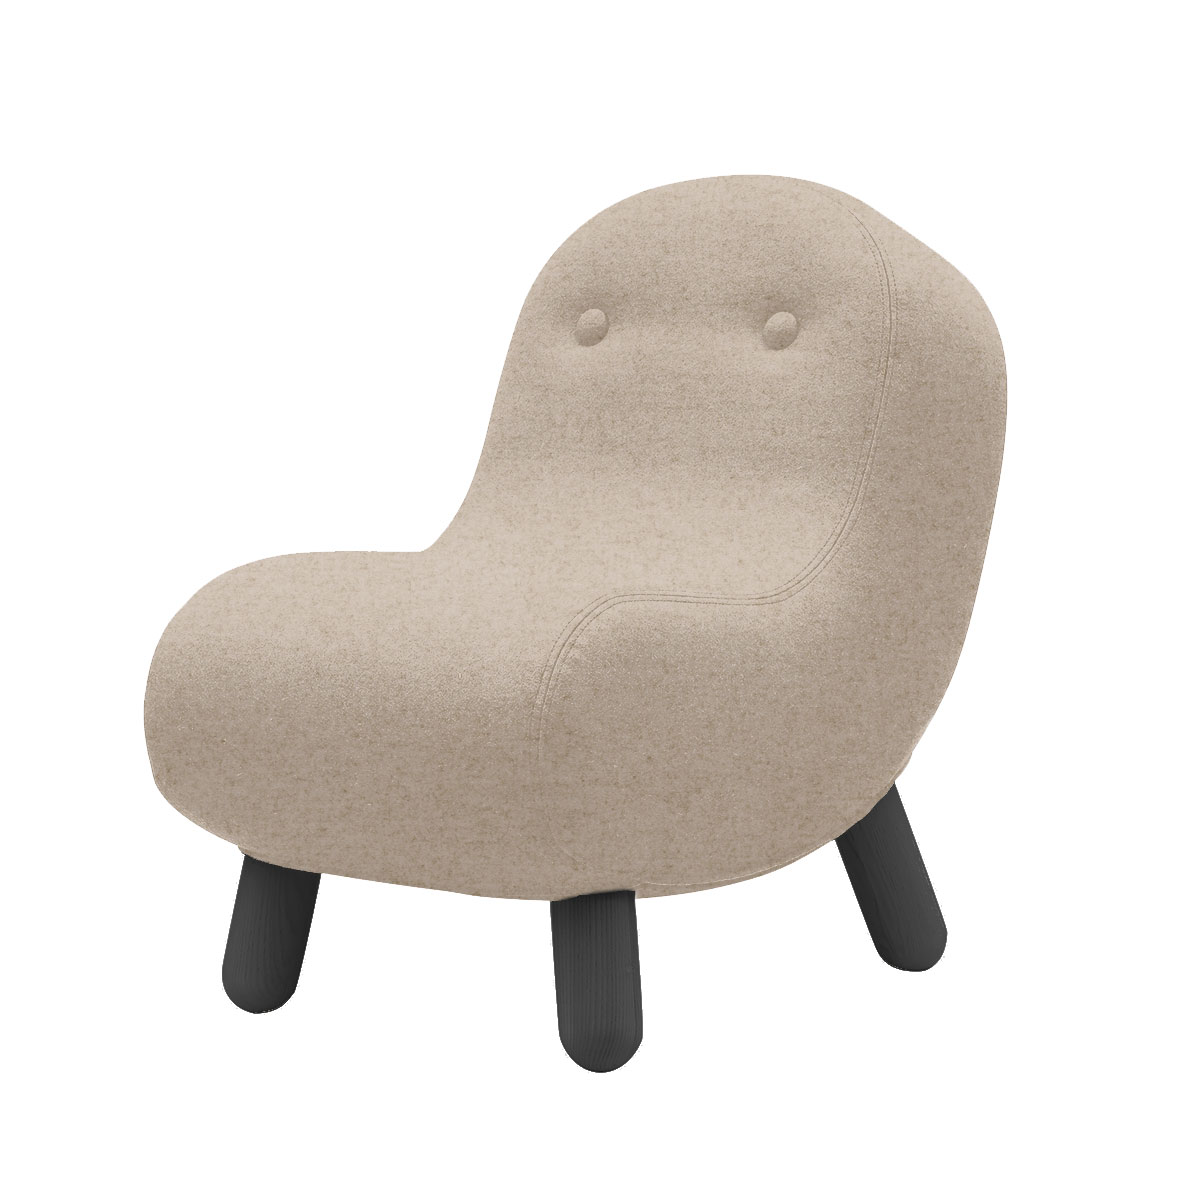 Bob Lounge Chair by Olson and Baker - Designer & Contemporary Sofas, Furniture - Olson and Baker showcases original designs from authentic, designer brands. Buy contemporary furniture, lighting, storage, sofas & chairs at Olson + Baker.